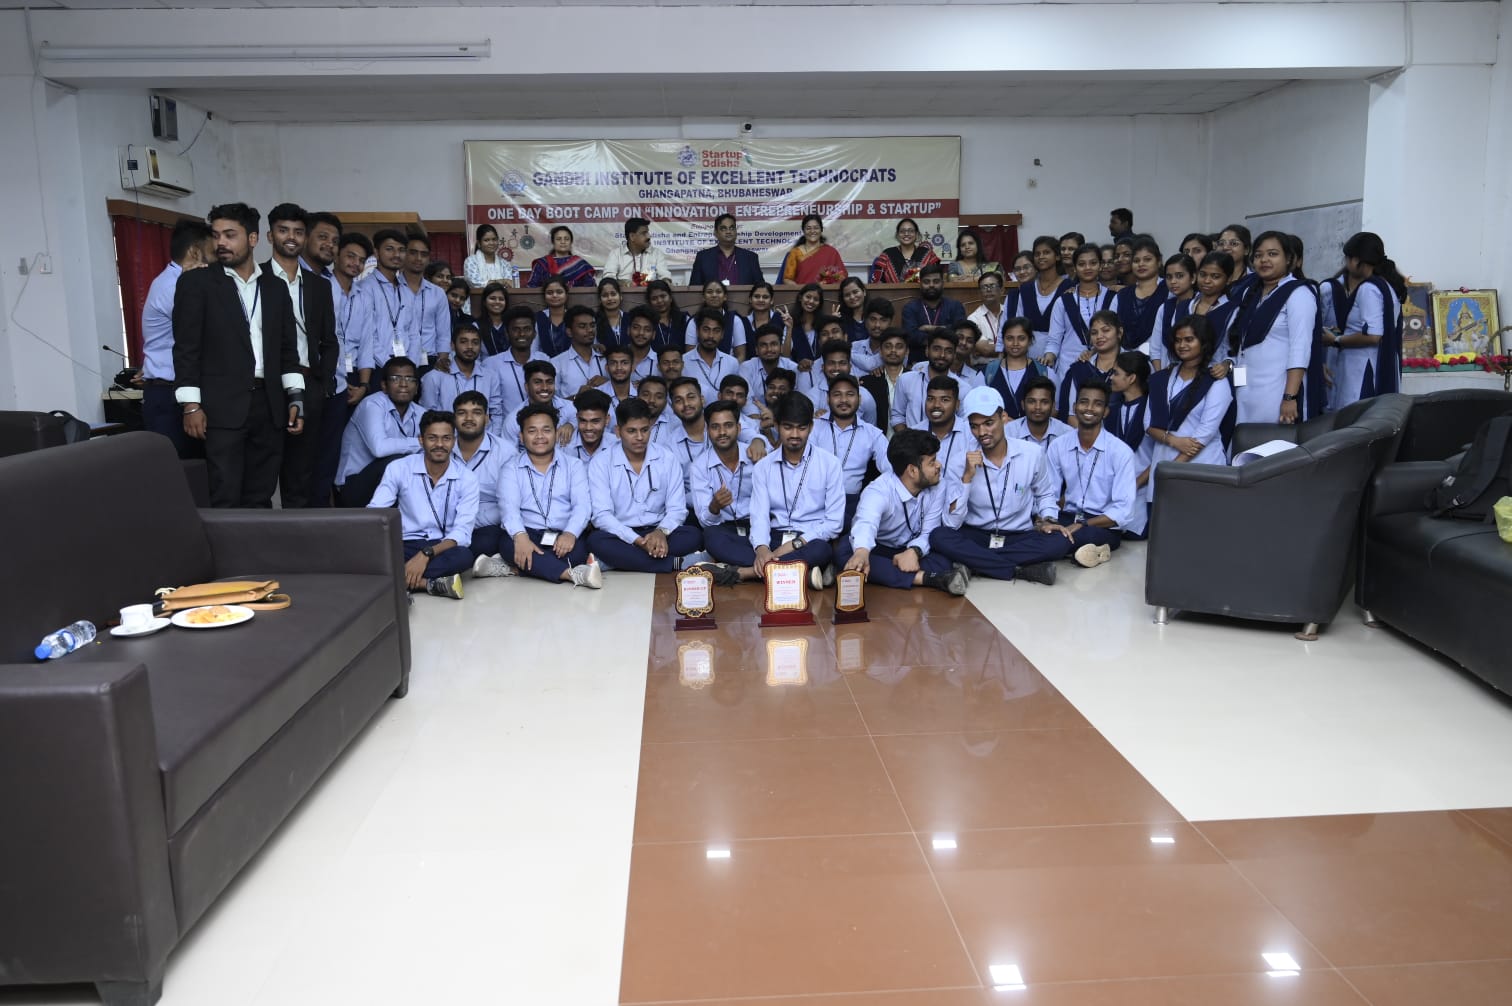 Bootcamp at Gandhi Institute of Excellent Technocrats, Ghangapatna